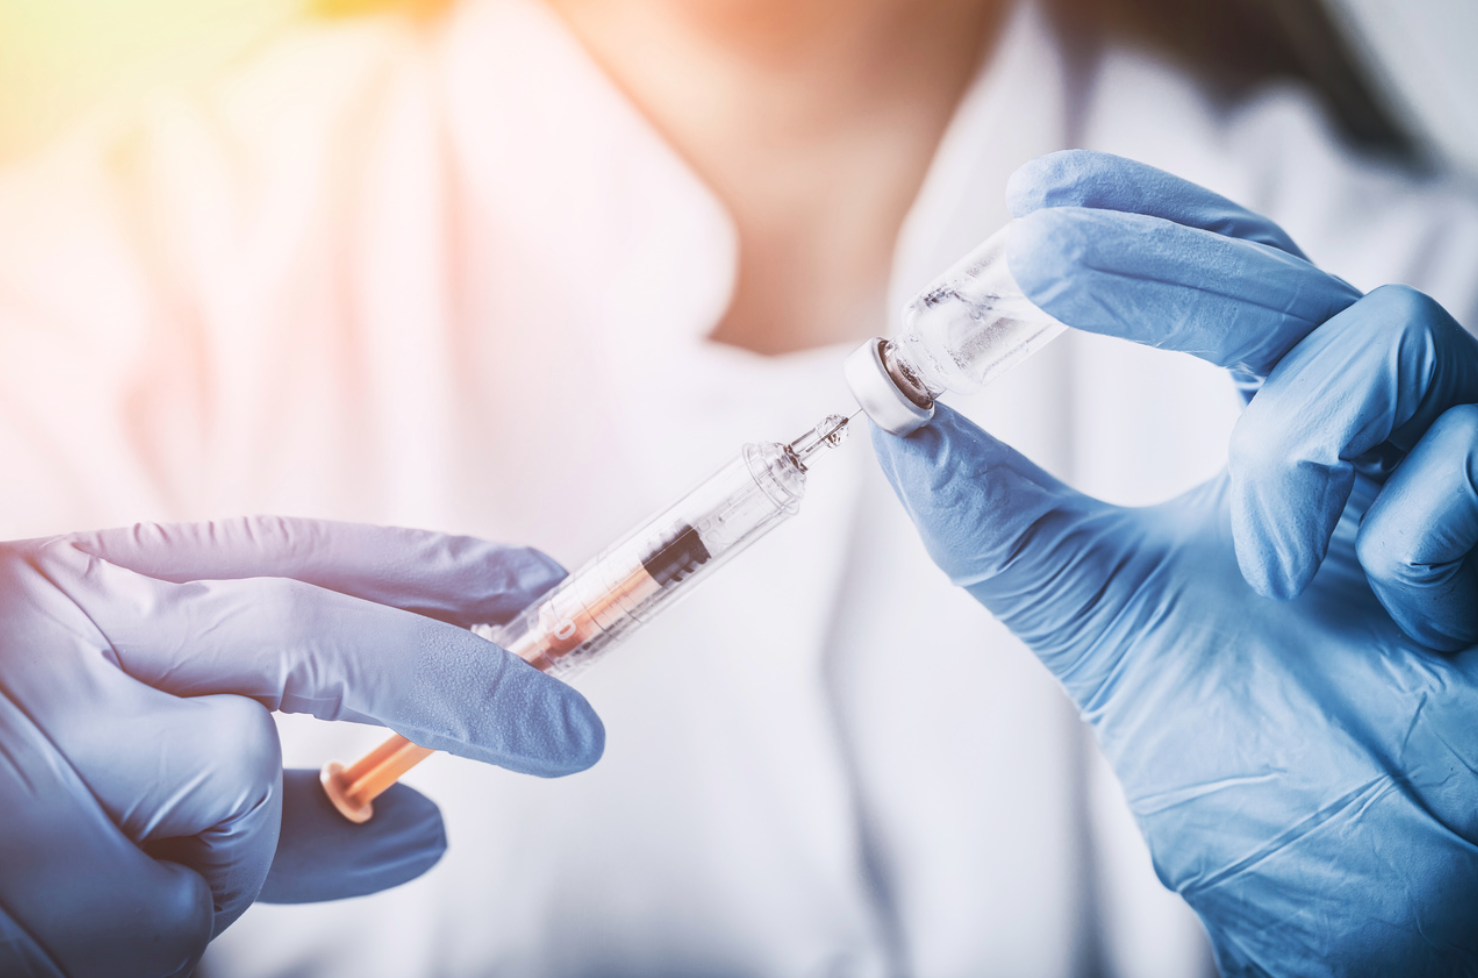 Study Results Show COVID-19 Vaccination Uptake Is Suboptimal Among Veterans 